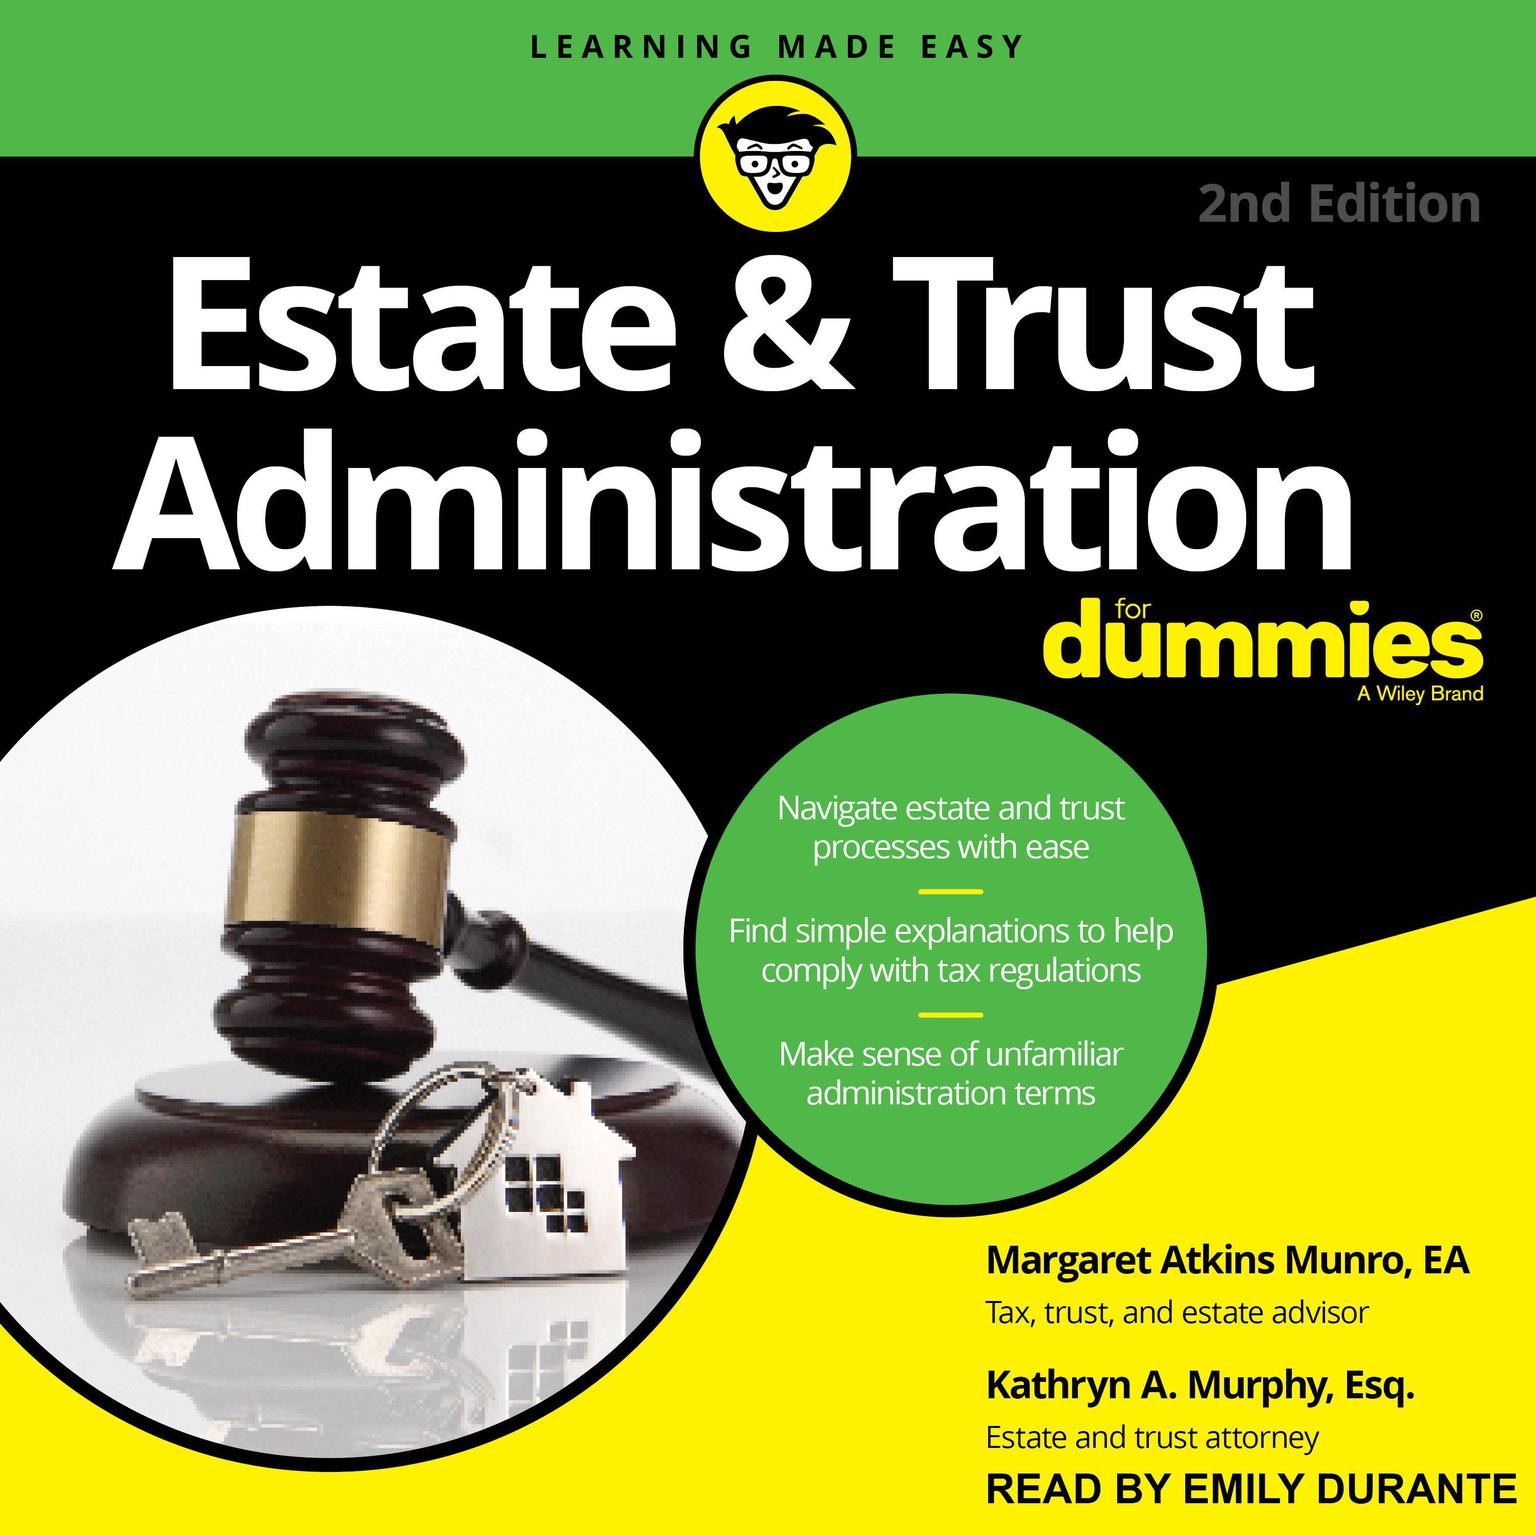 Estate & Trust Administration For Dummies Audiobook, by Kathryn A. Murphy